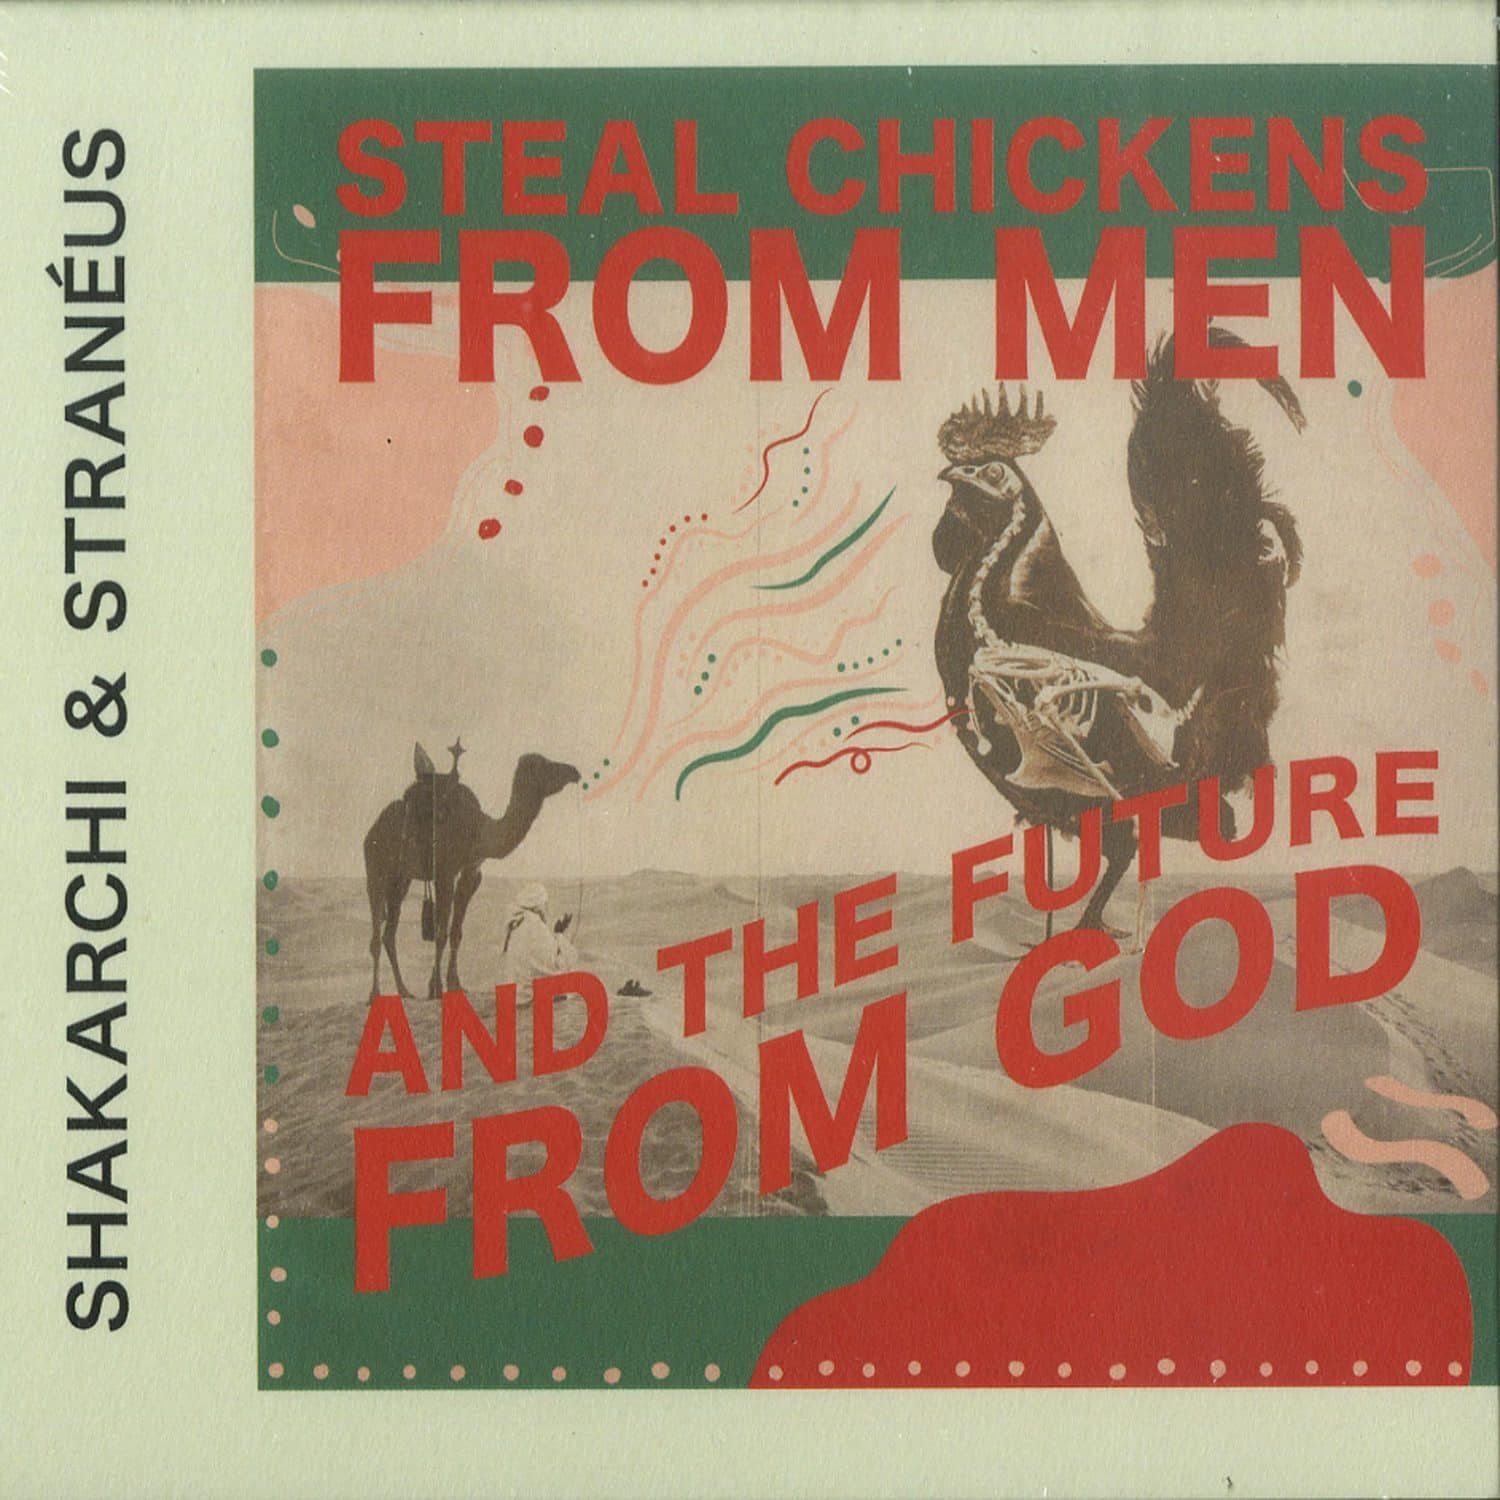 Shakarchi & Straneus - STEAL CHICKENS FROM MEN AND THE FUTURE FROM GOD 